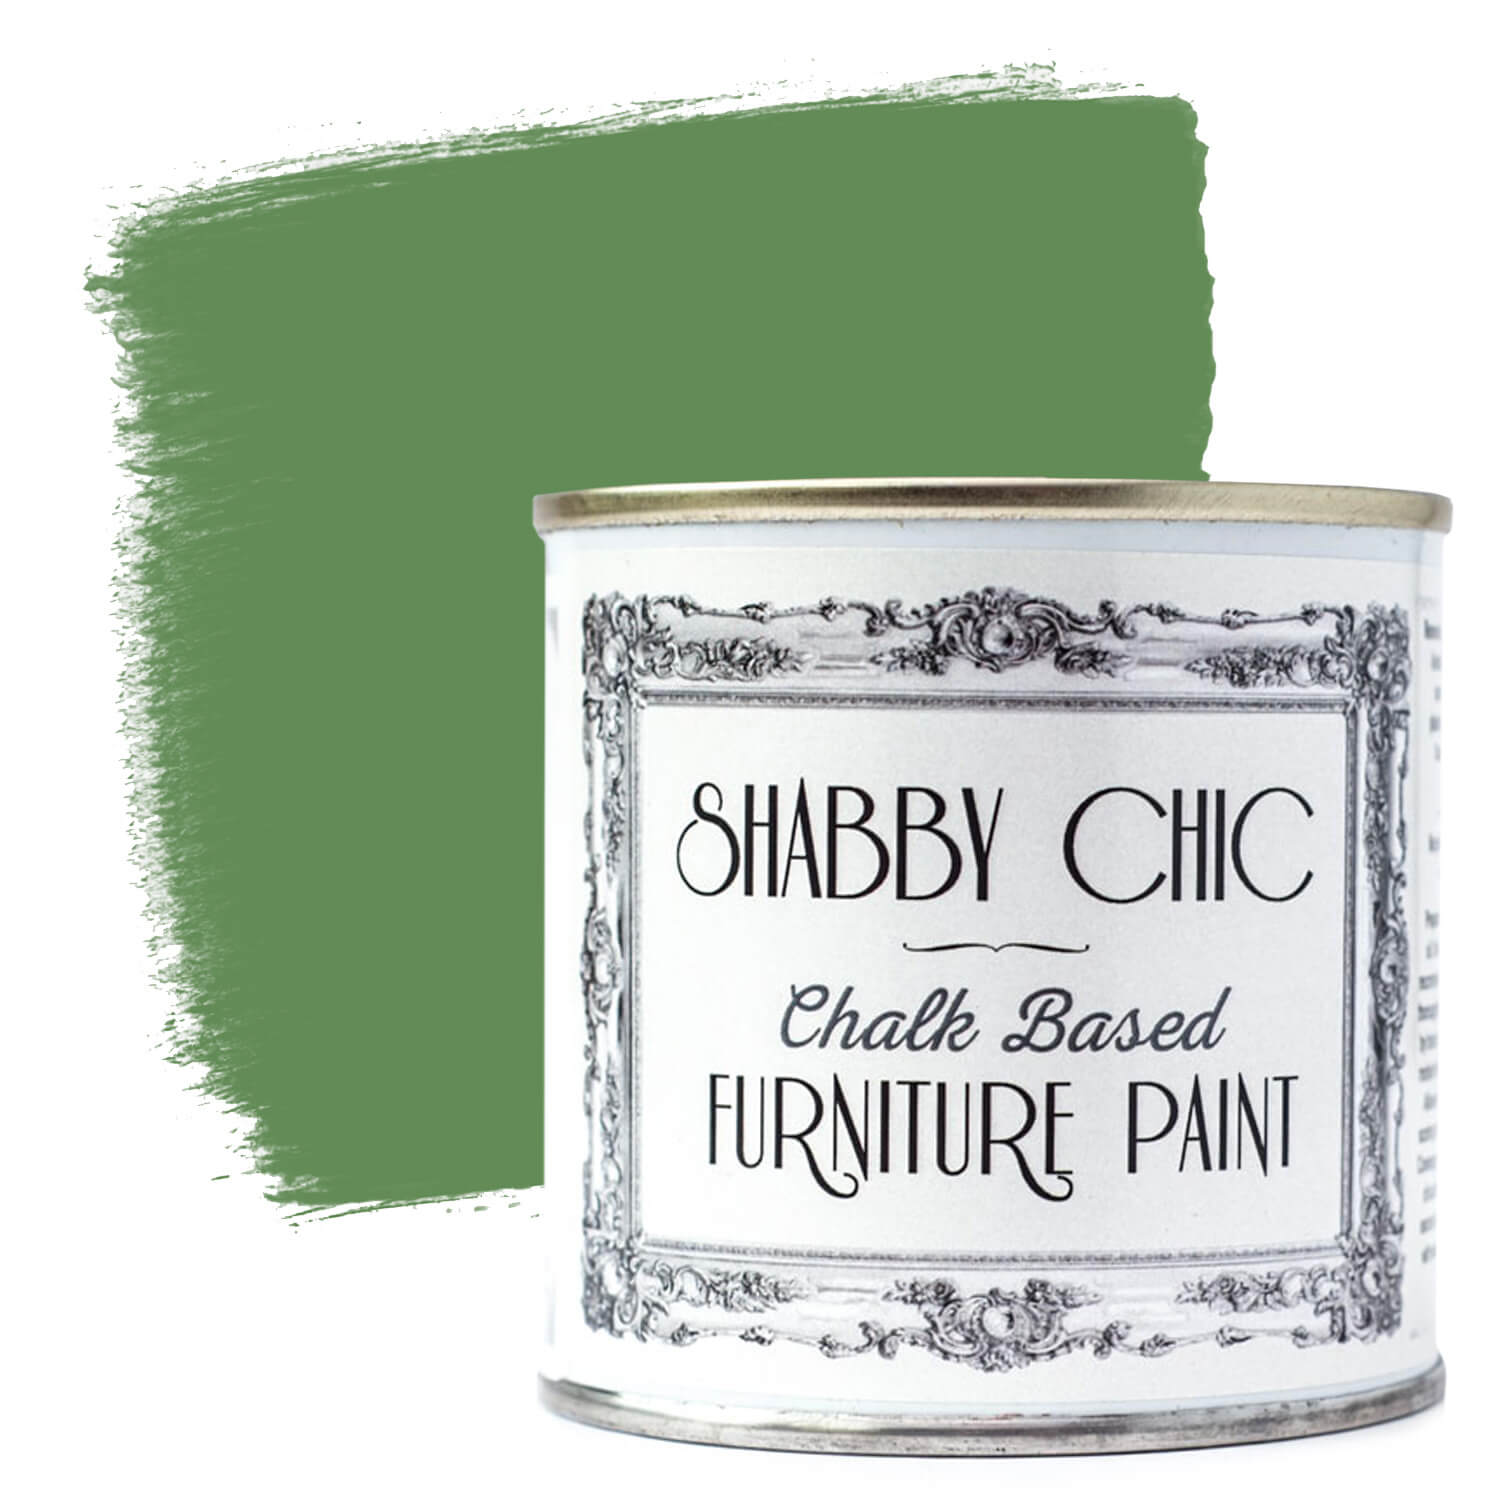 Shabby Chic Furniture Paint in Cottage Green